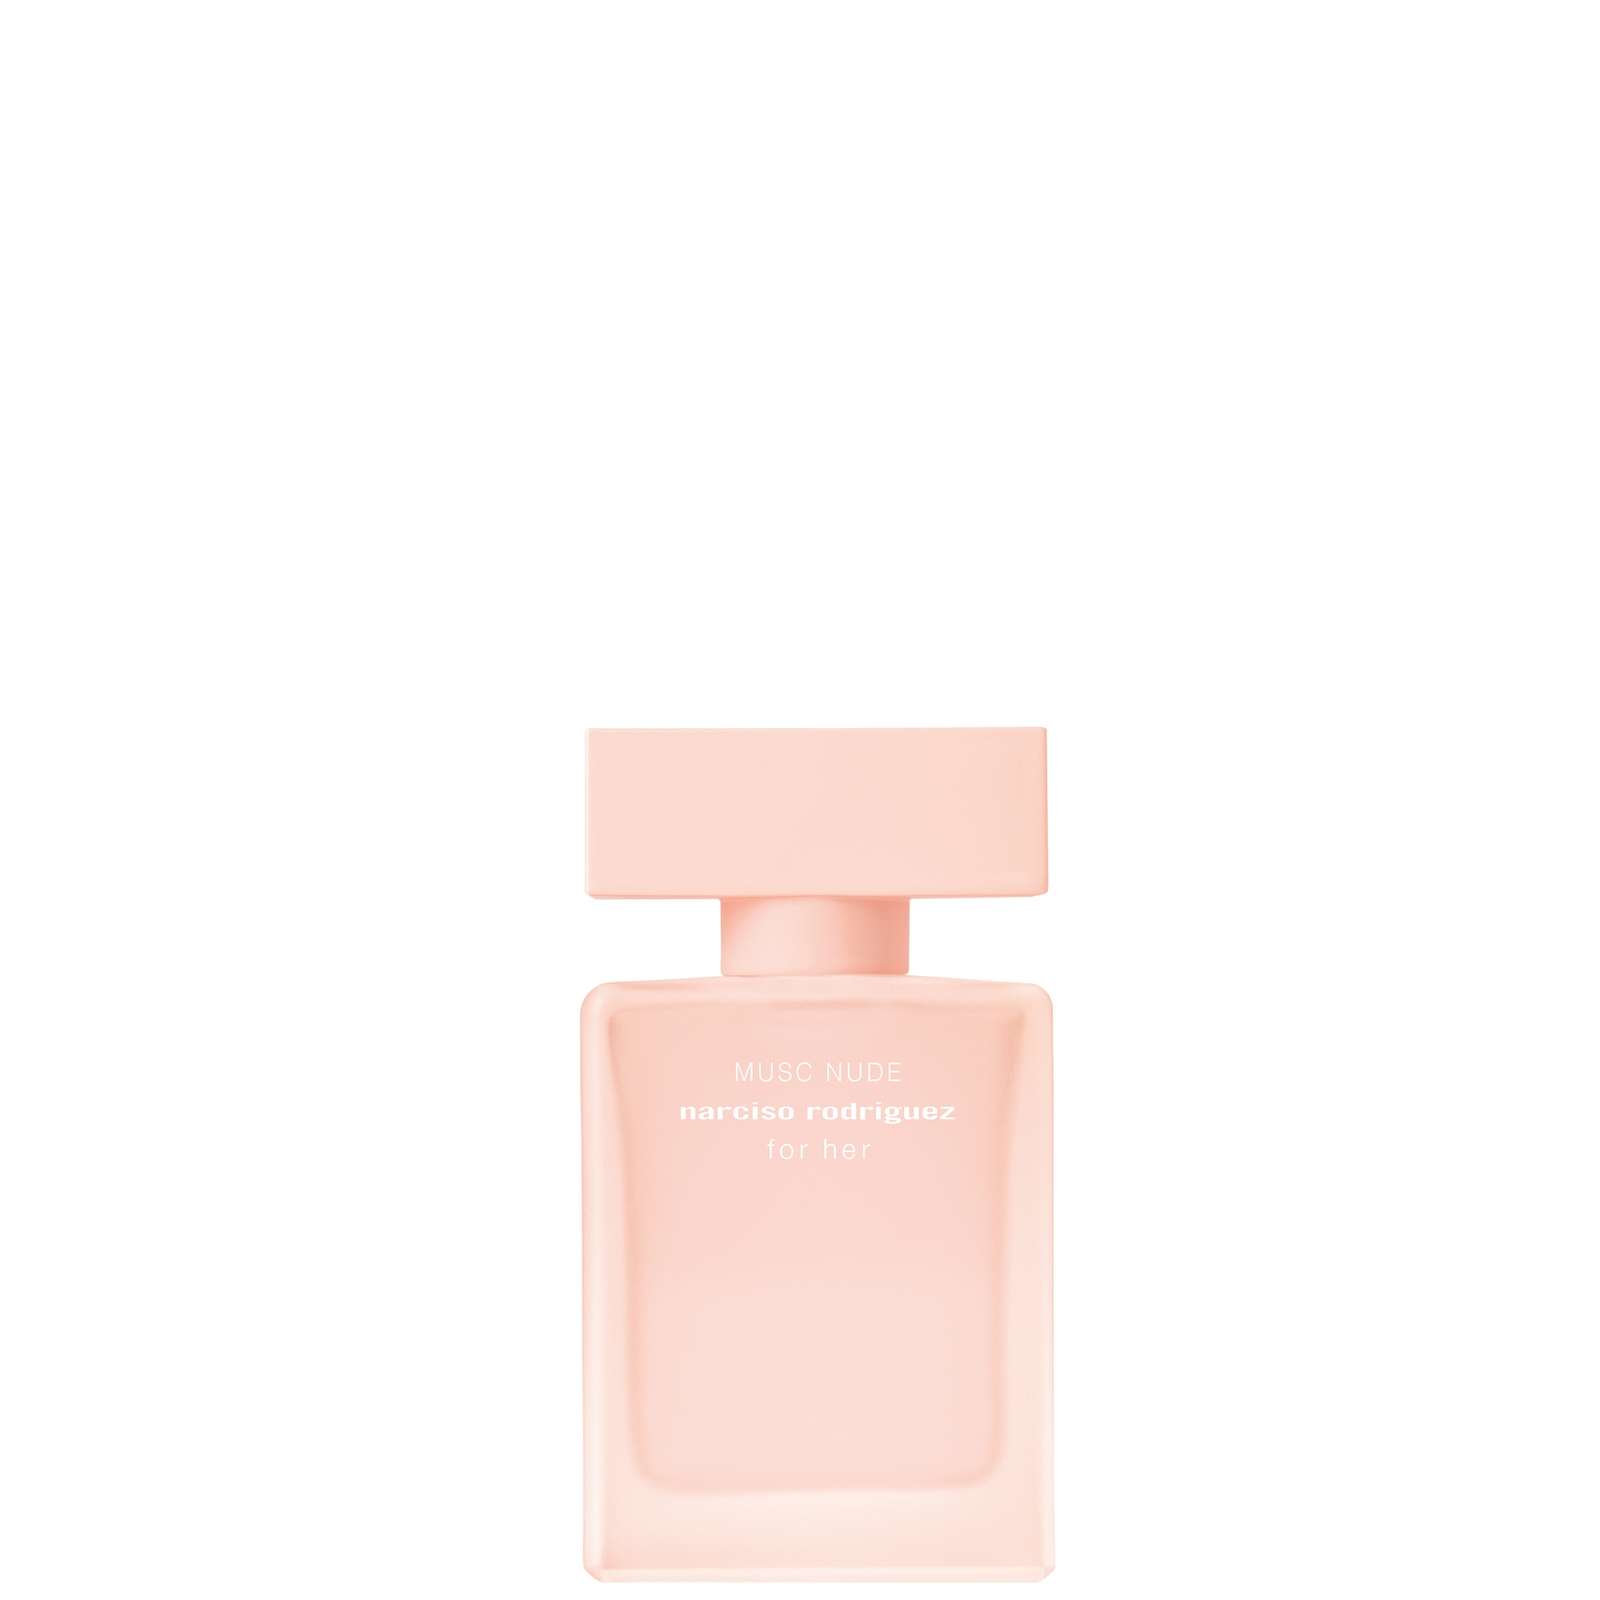 Image of Narciso Rodriguez for Her Musc Nude Eau de Parfum 30ml